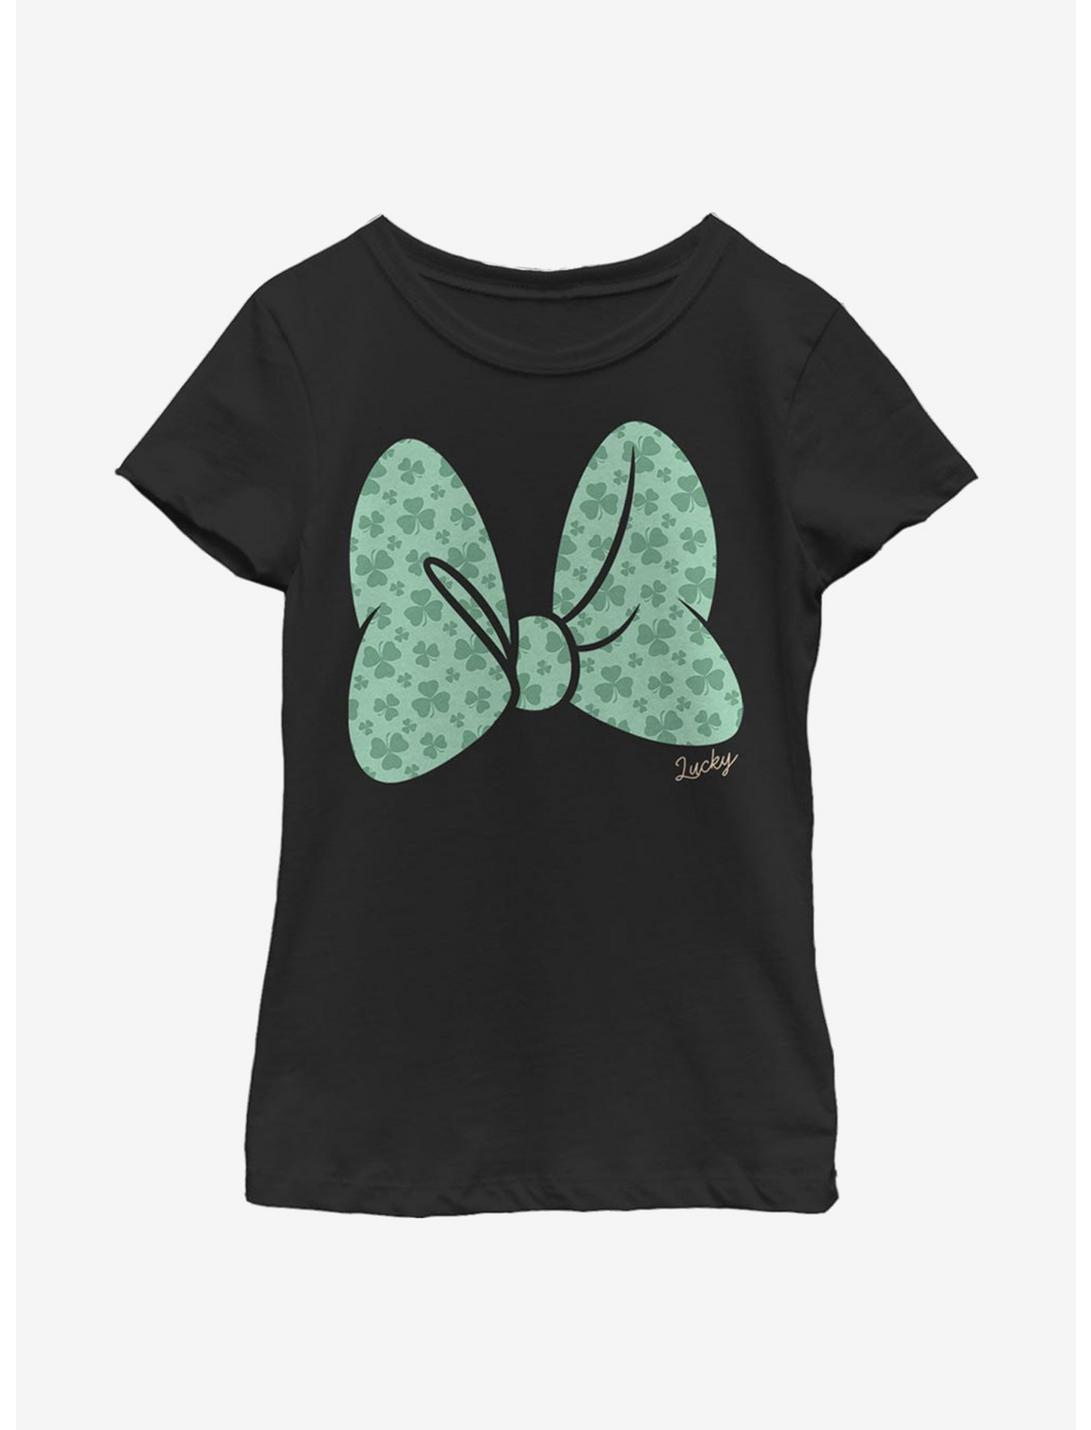 Disney Minnie Mouse Clover Bow Youth Girls T-Shirt, BLACK, hi-res